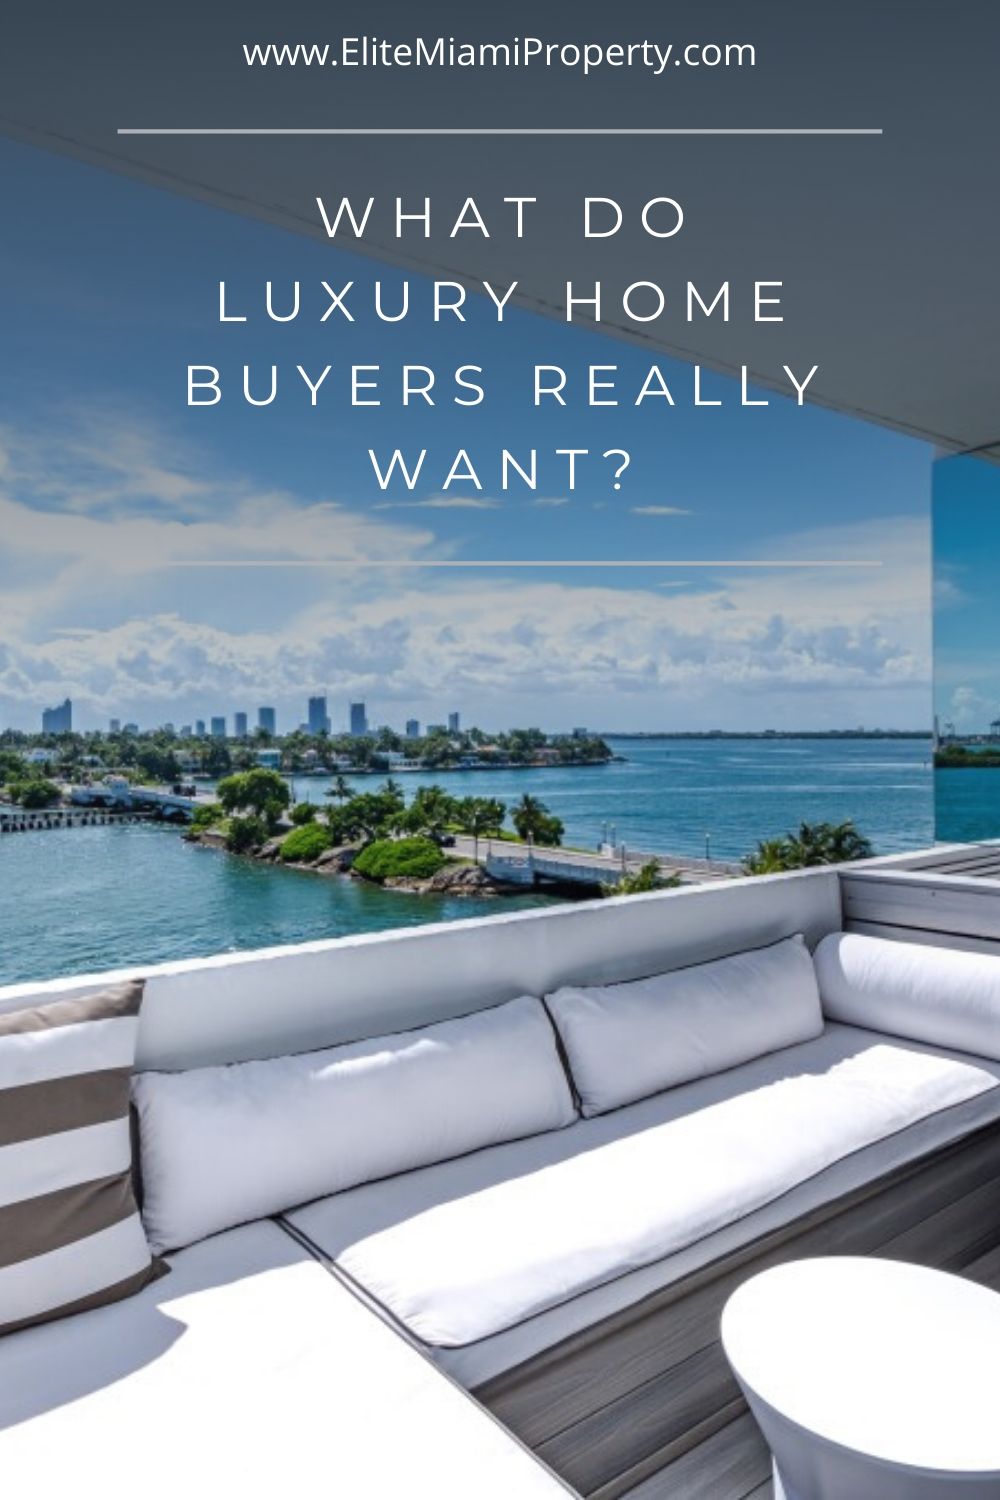 What Do Luxury Home Buyers Really Want?